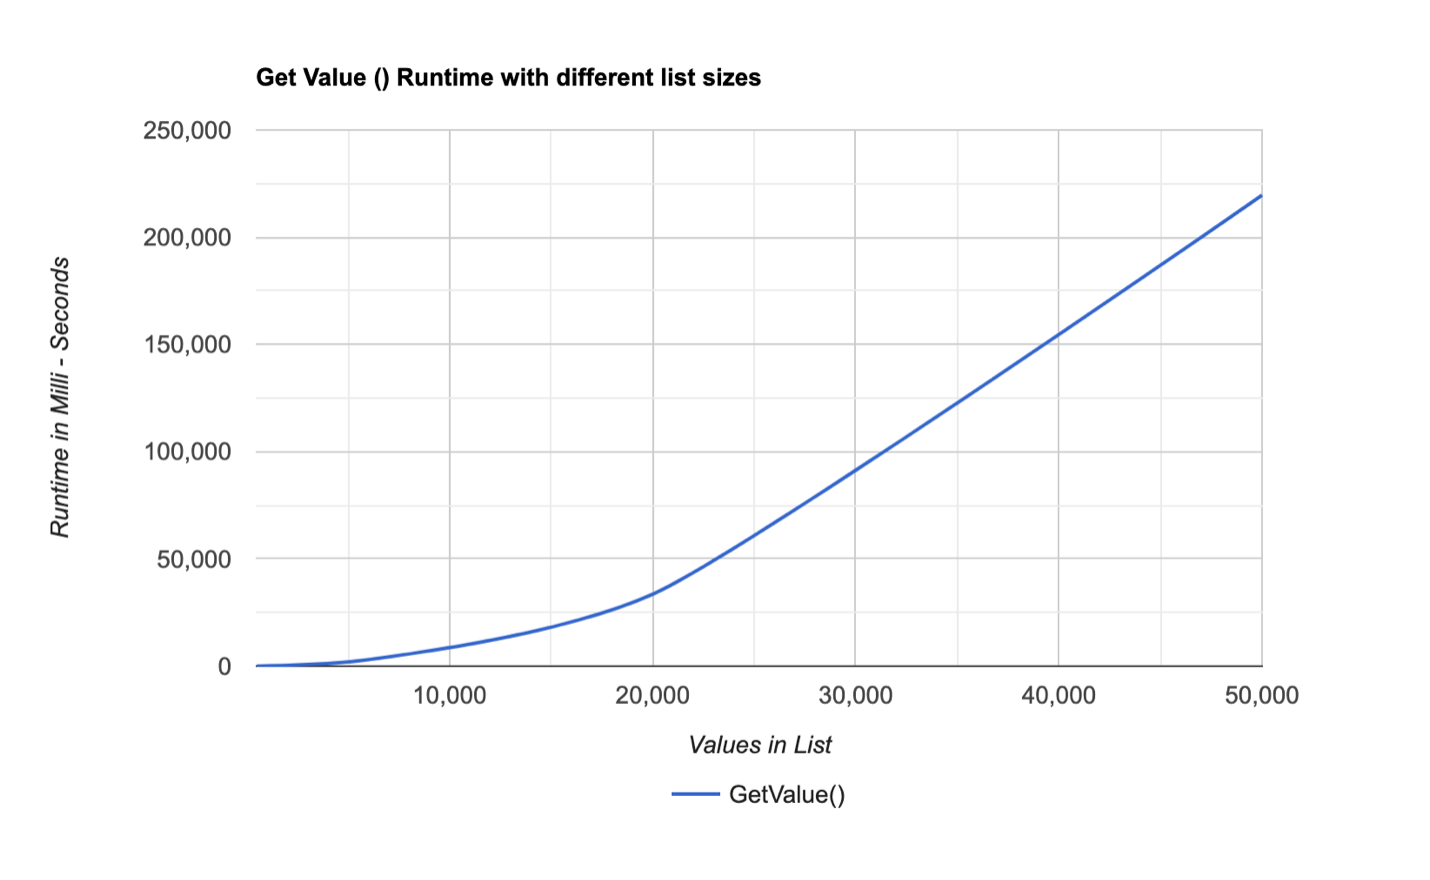 results of stress testing GetValue function on a list